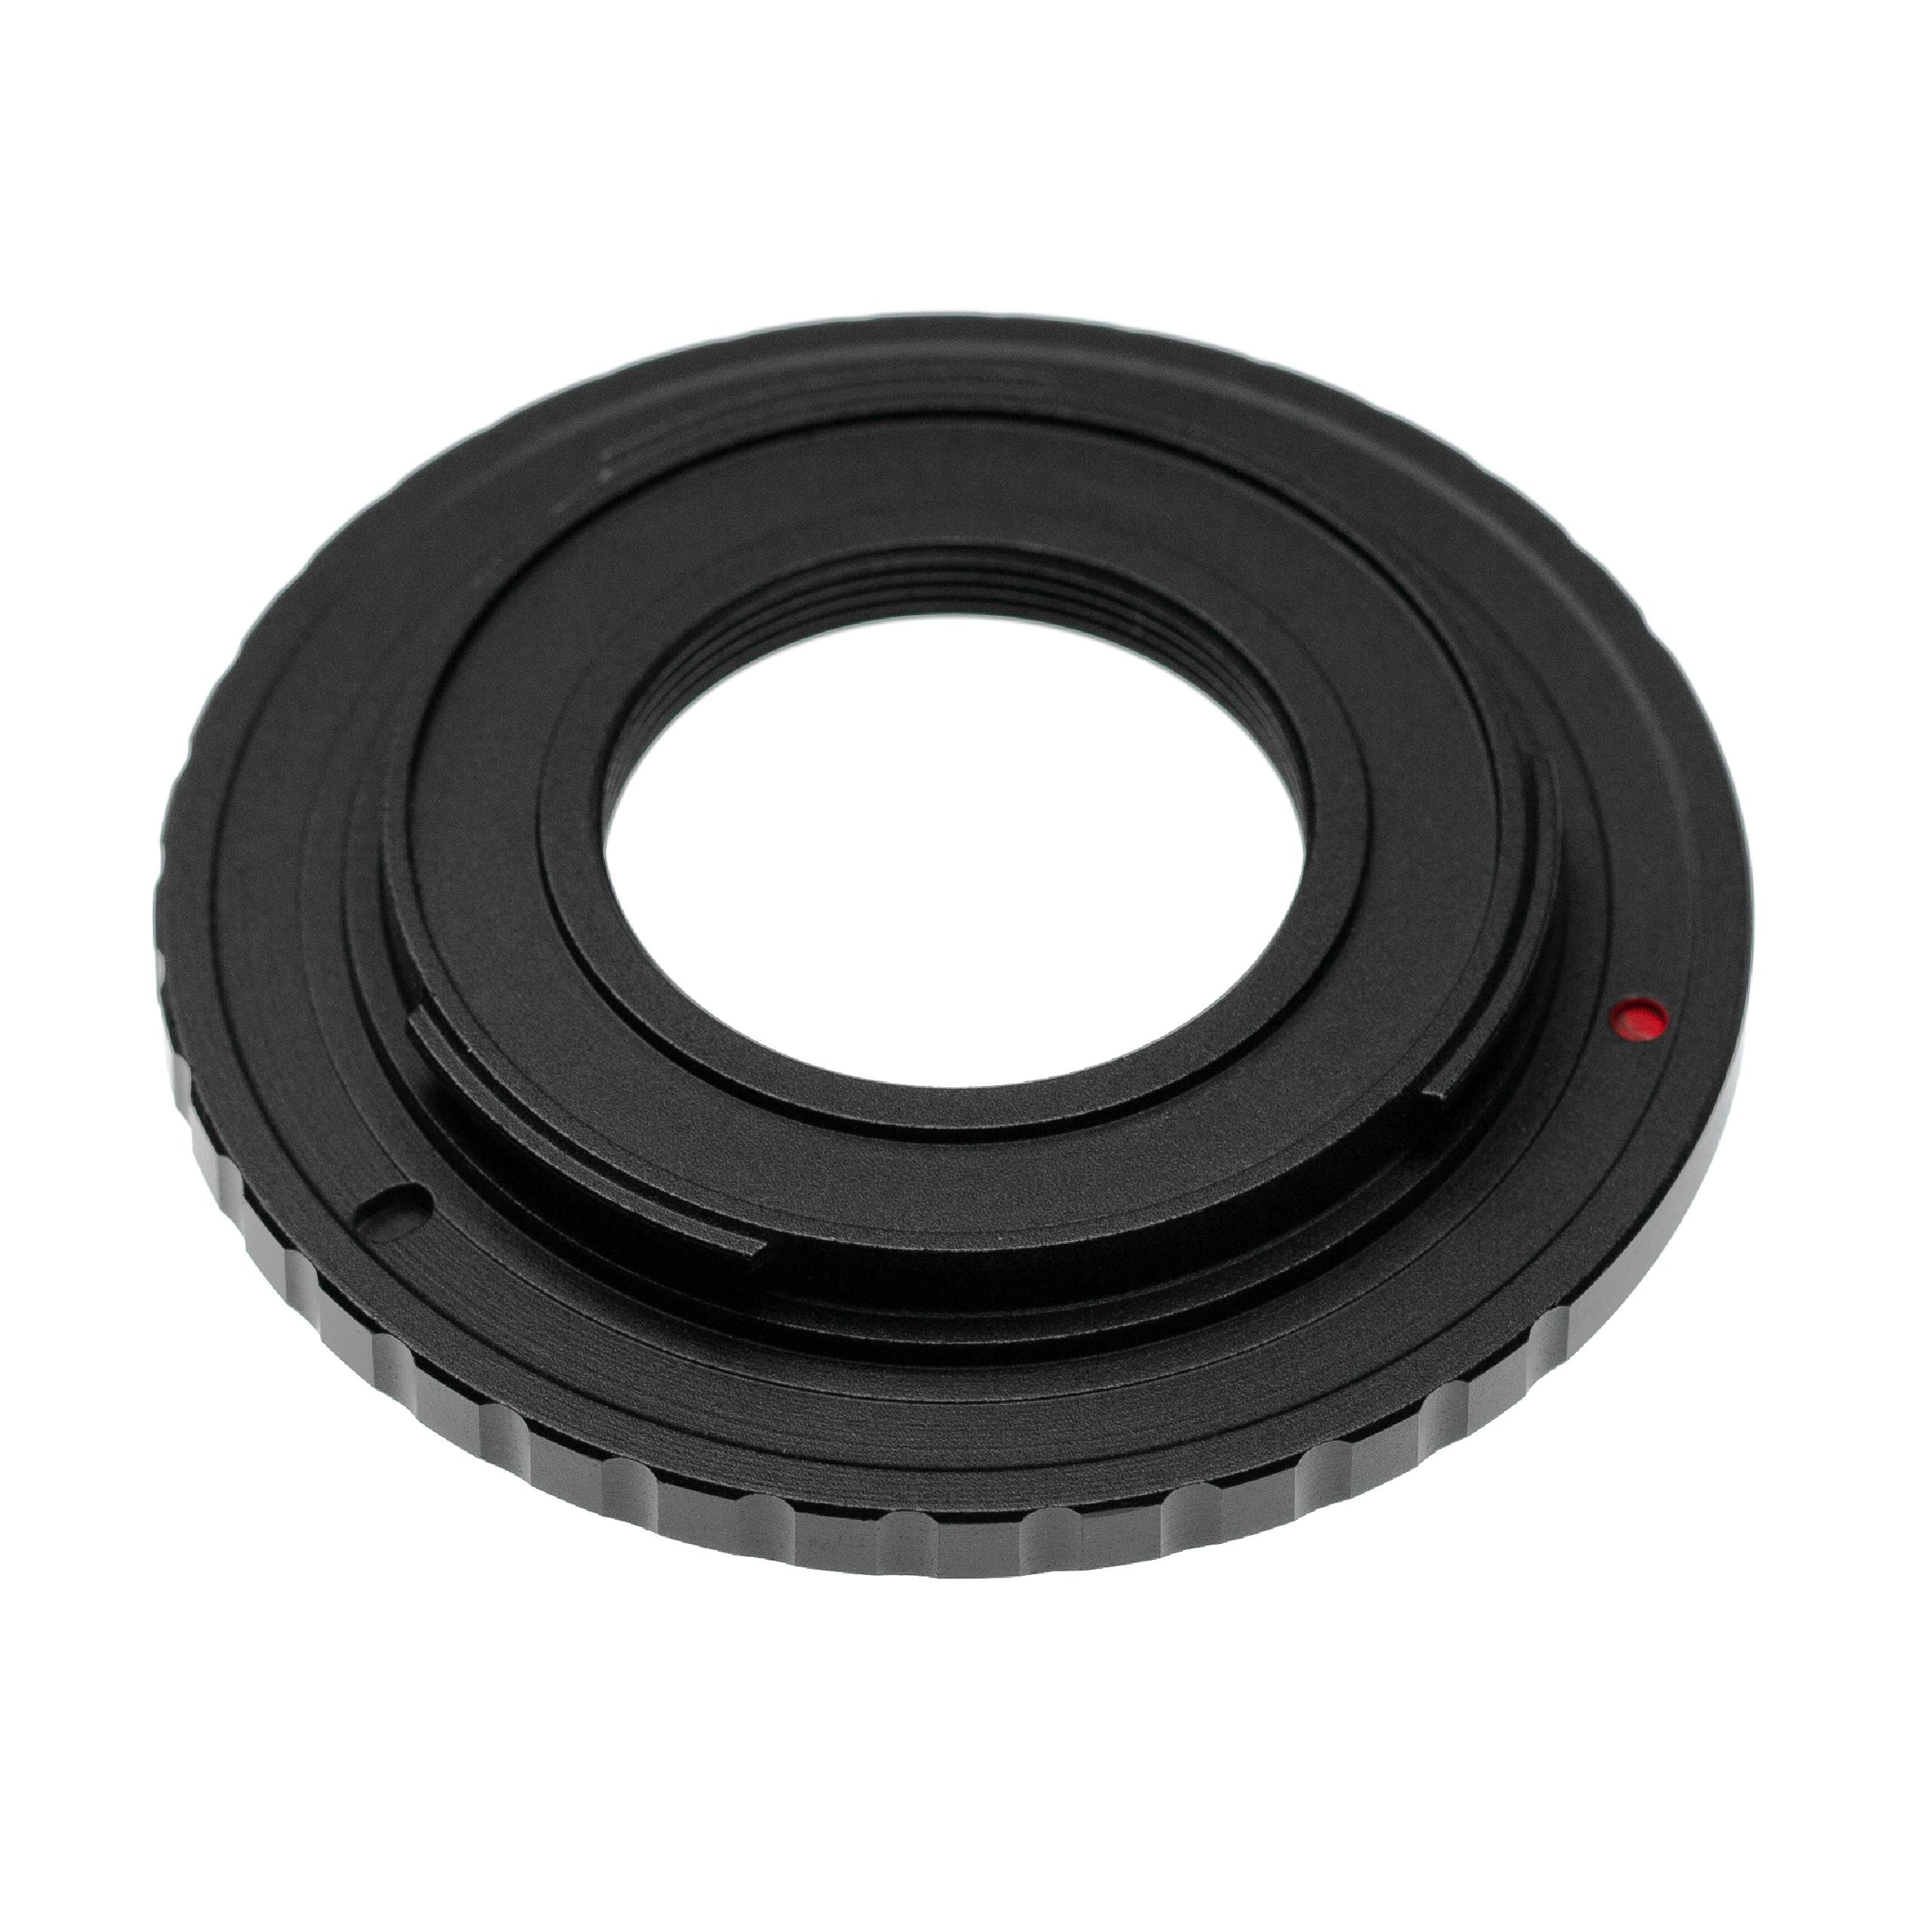 vhbw Adapter Ring for Lenses with M42 Thread Camera, Lens Black